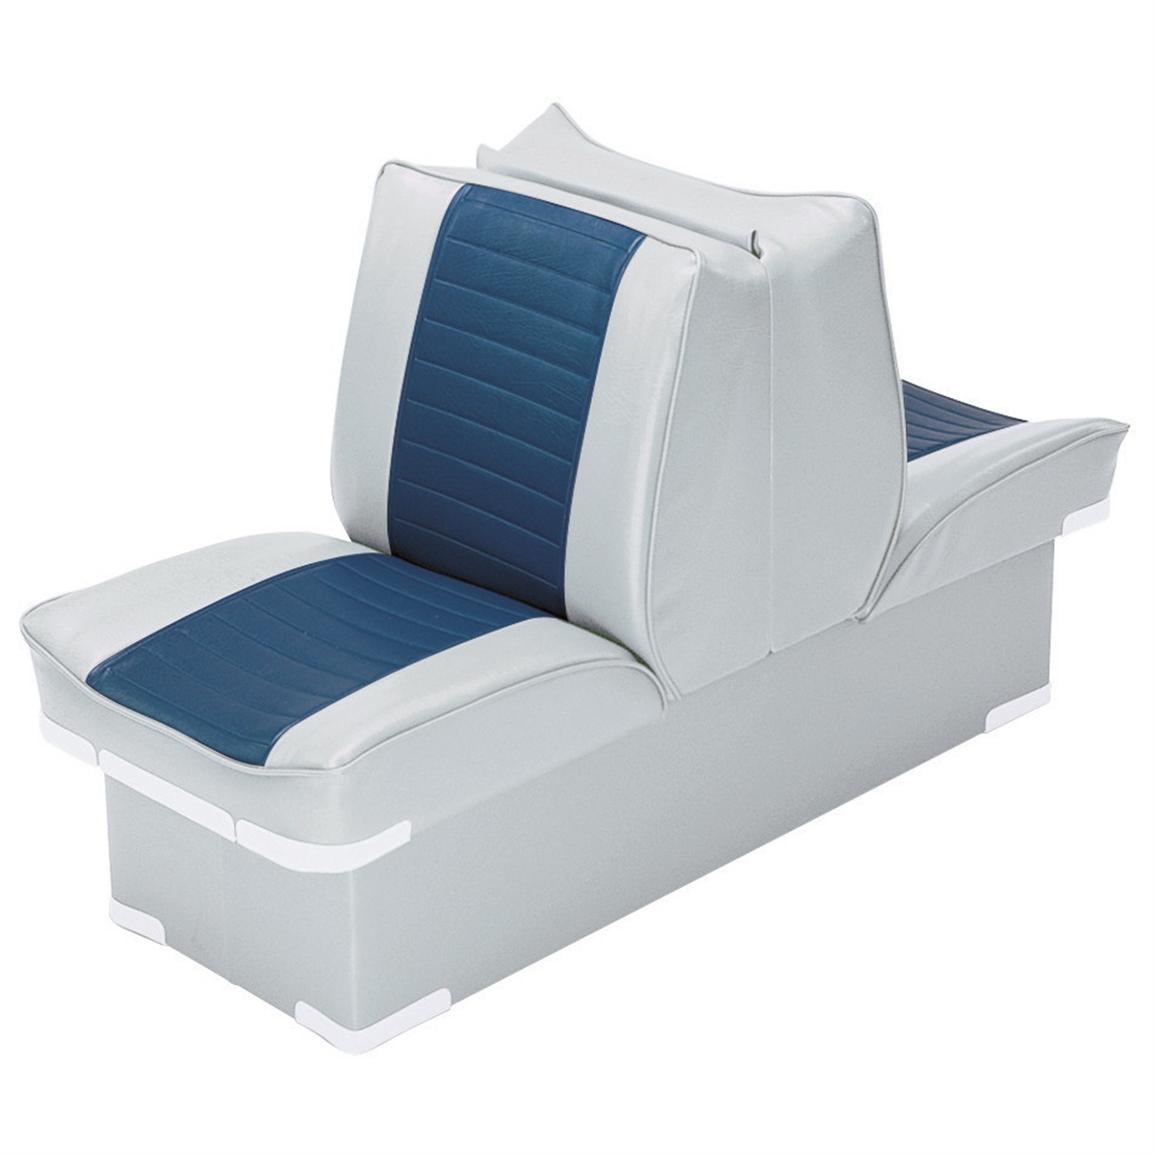 Wise Boat Lounge Seat, Grey / Navy